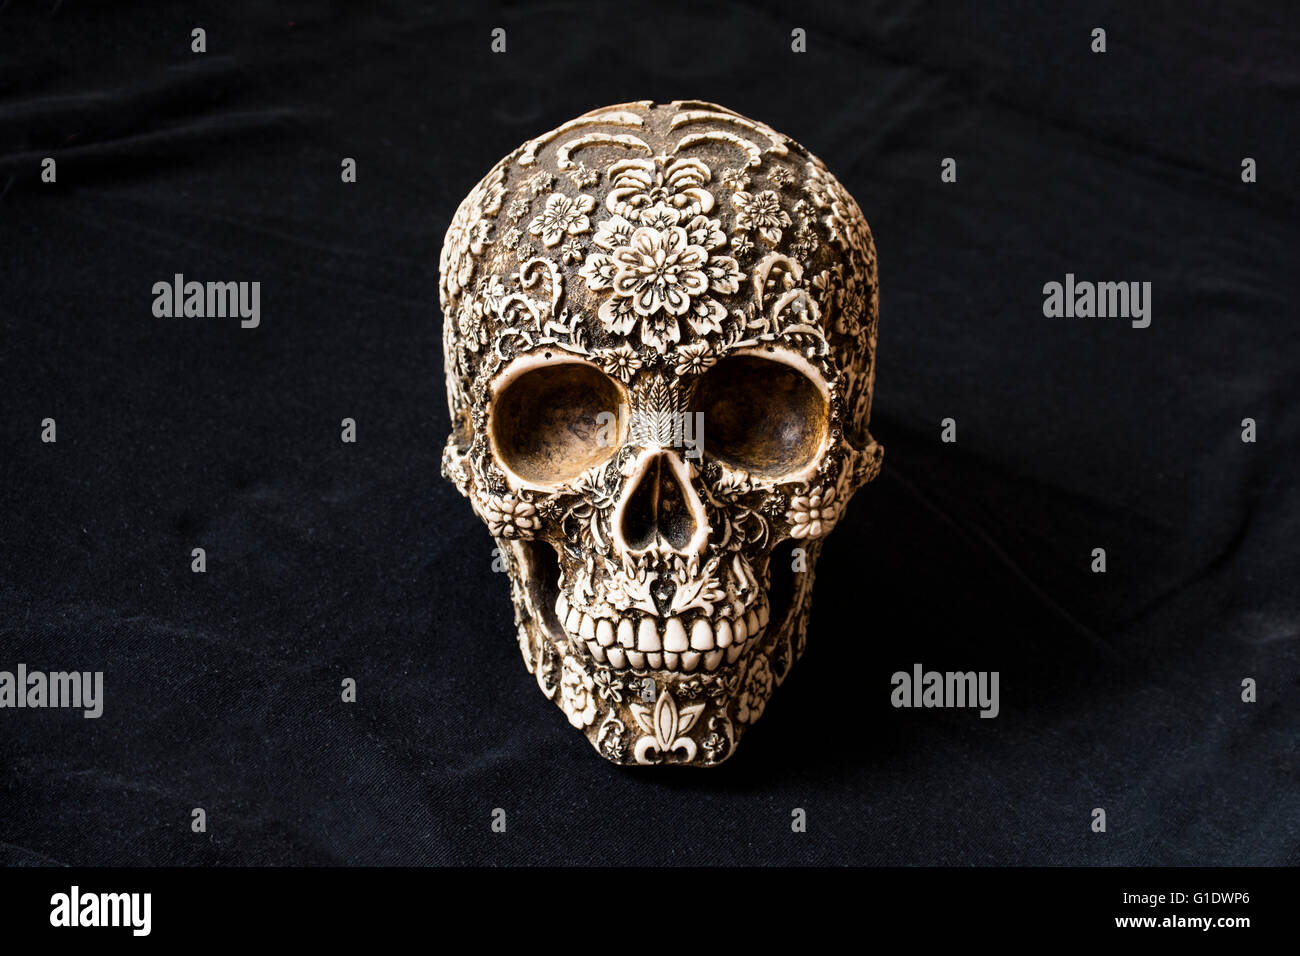 Artisan model of a decorated skull used for 'Dia de Muertos' Representation of the death or 'Parca', 'La huesuda' and many names Stock Photo